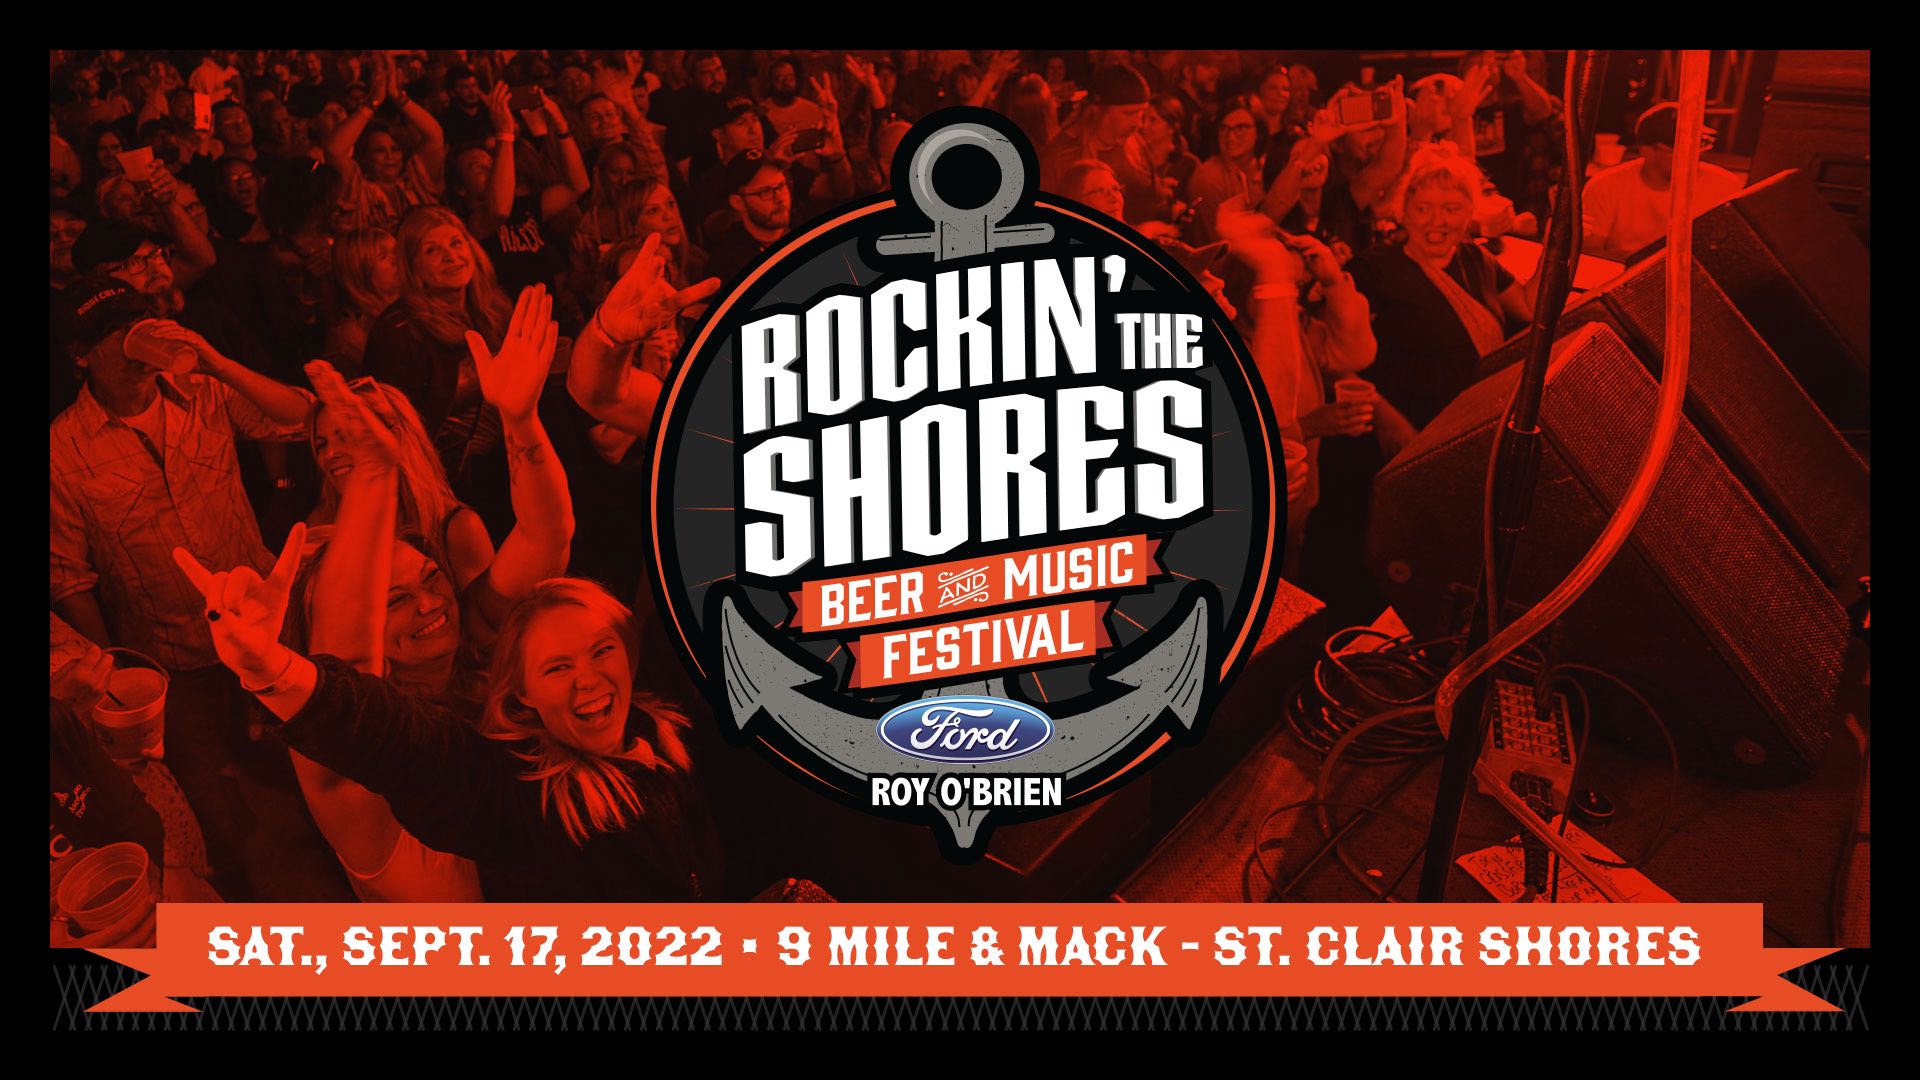 Rockin' the Shores Beer & Music Festival presented by Ford Roy O'Brien; Saturday September 17, 2022 at 9 Mile & Mack in St. Clair Shores; featuring concert goers in background